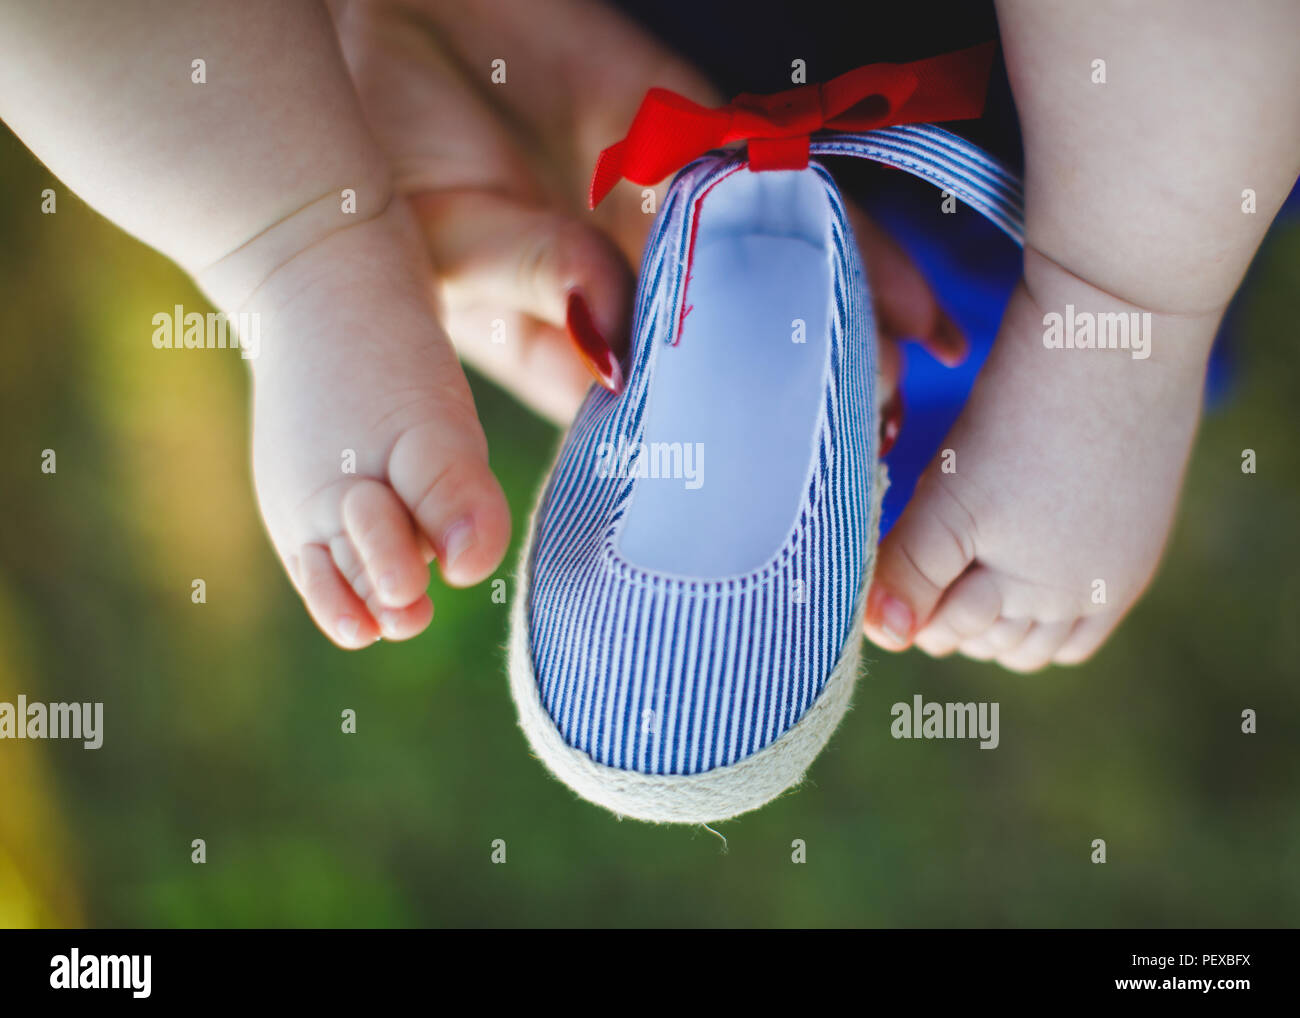 Baby leg and shoes. Baby footwear concept. Stock Photo